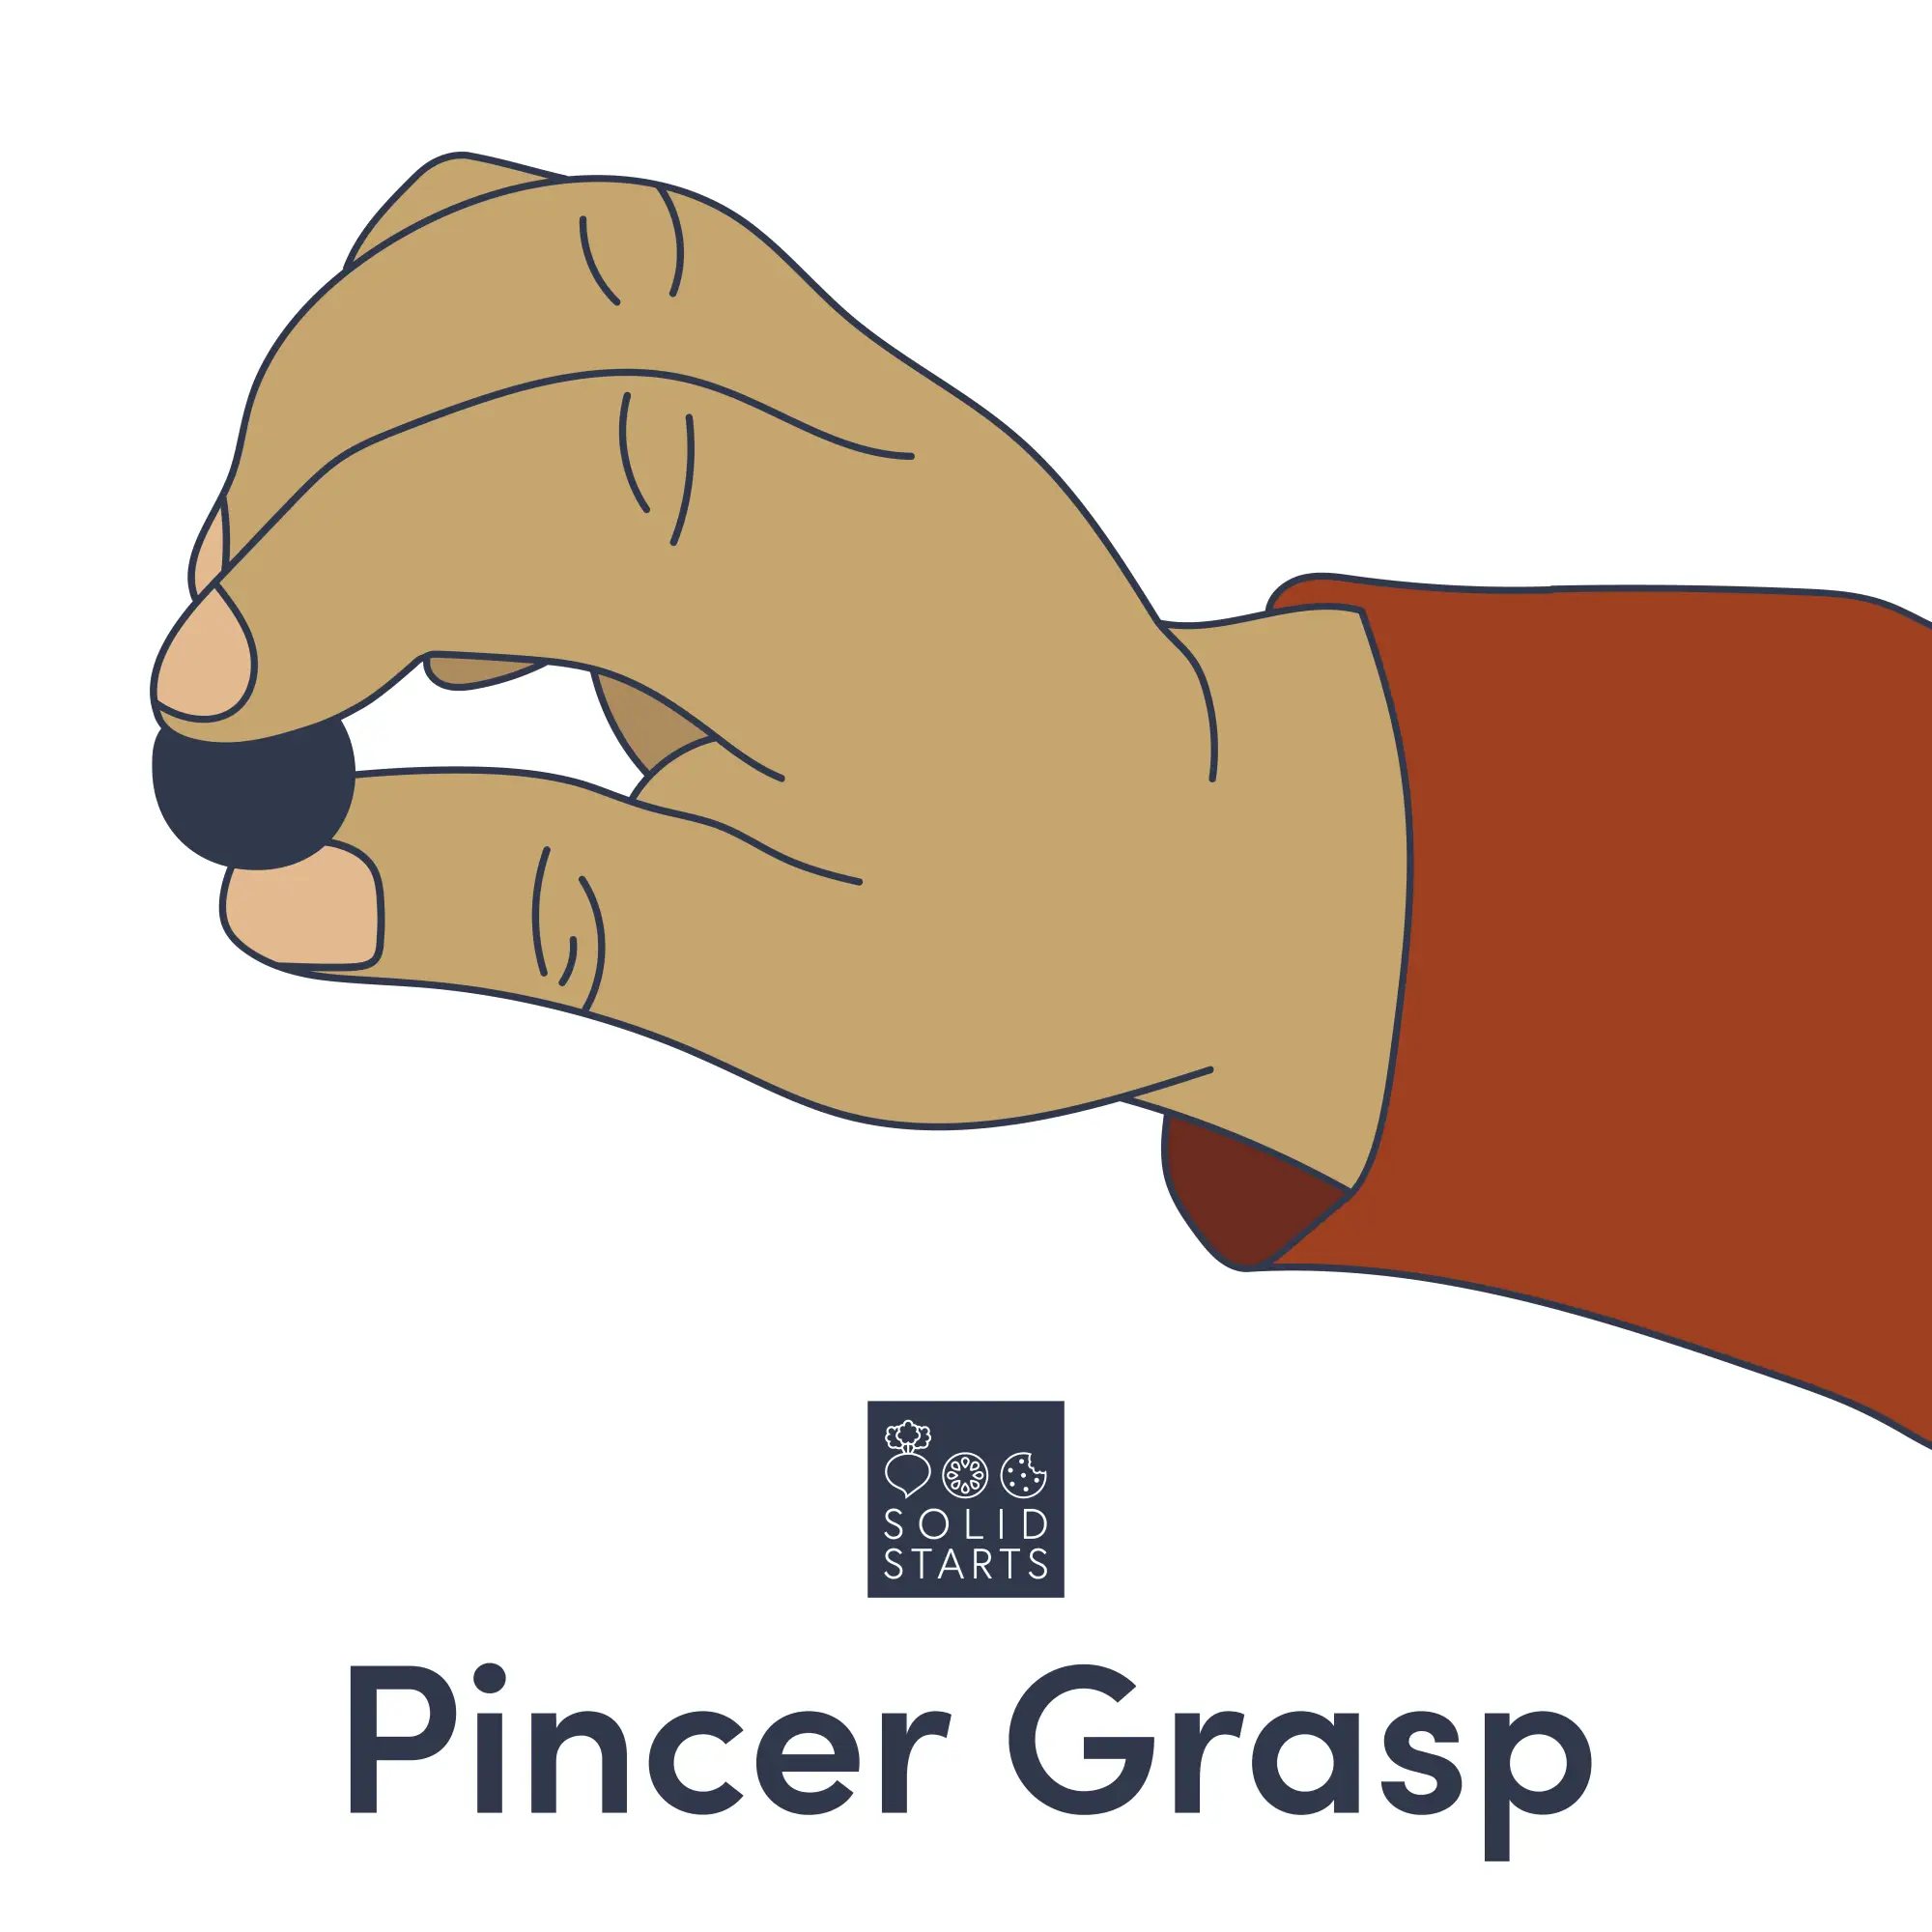 Cartoon illustration of a hand with a blueberry pinched between the tip of the thumb and index finger, with the words "Pincer Grasp" written on the bottom